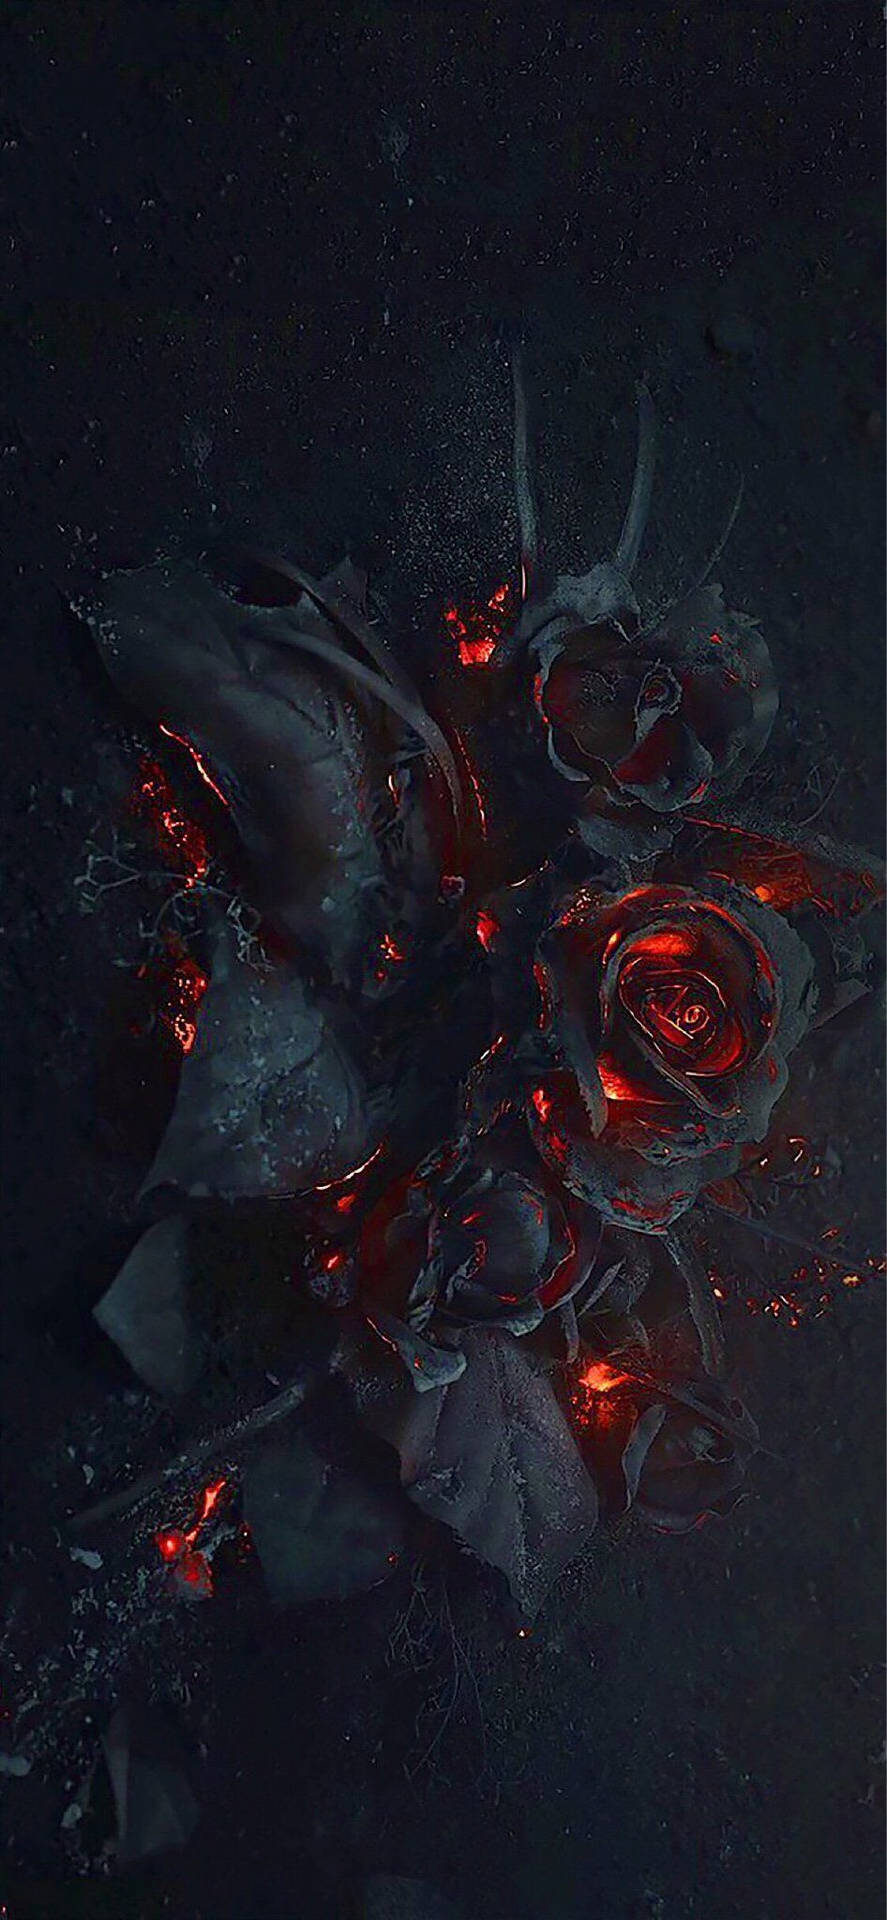 A Black And Red Rose With Flames On It Wallpaper